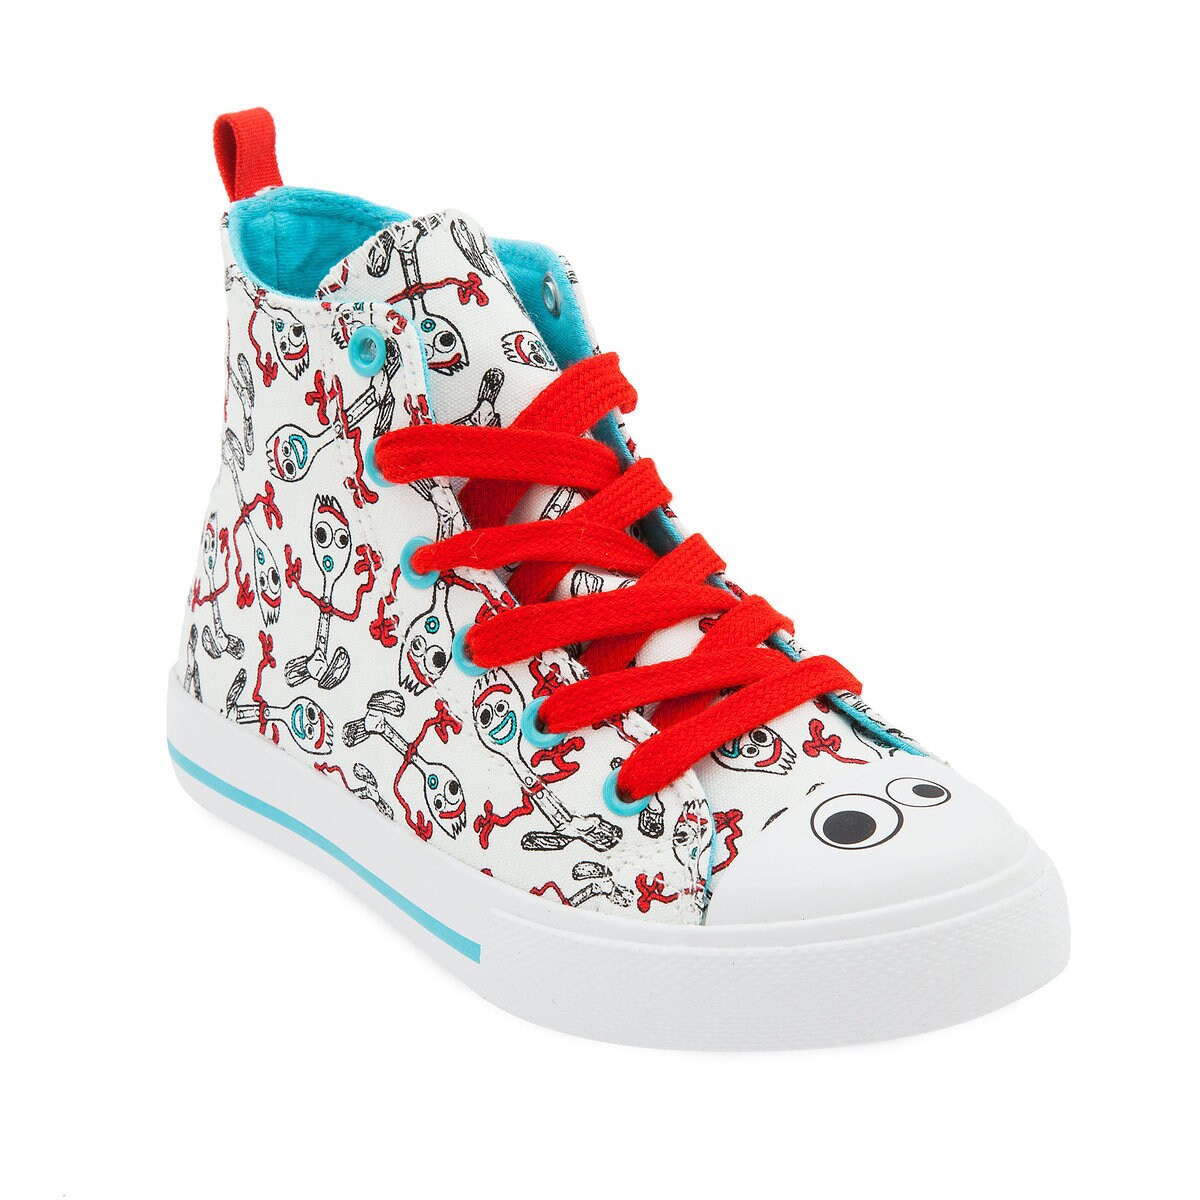 Product Image of Forky Sneakers for Kids - Toy Story 4 # 1